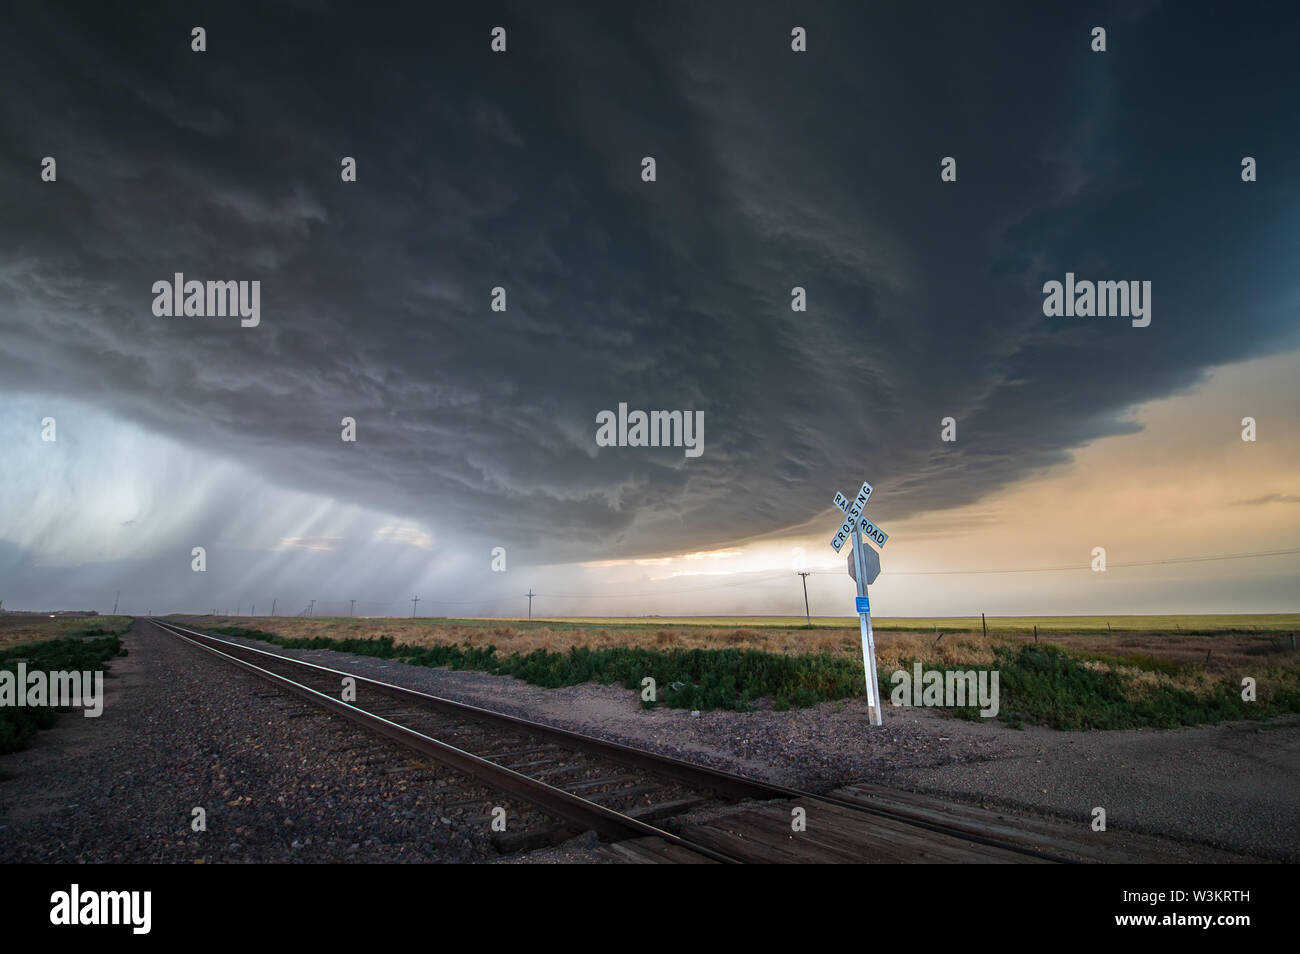 A large storm blows in over a railroad crossing, dumping heavy rain and producing extreme winds. Stock Photo